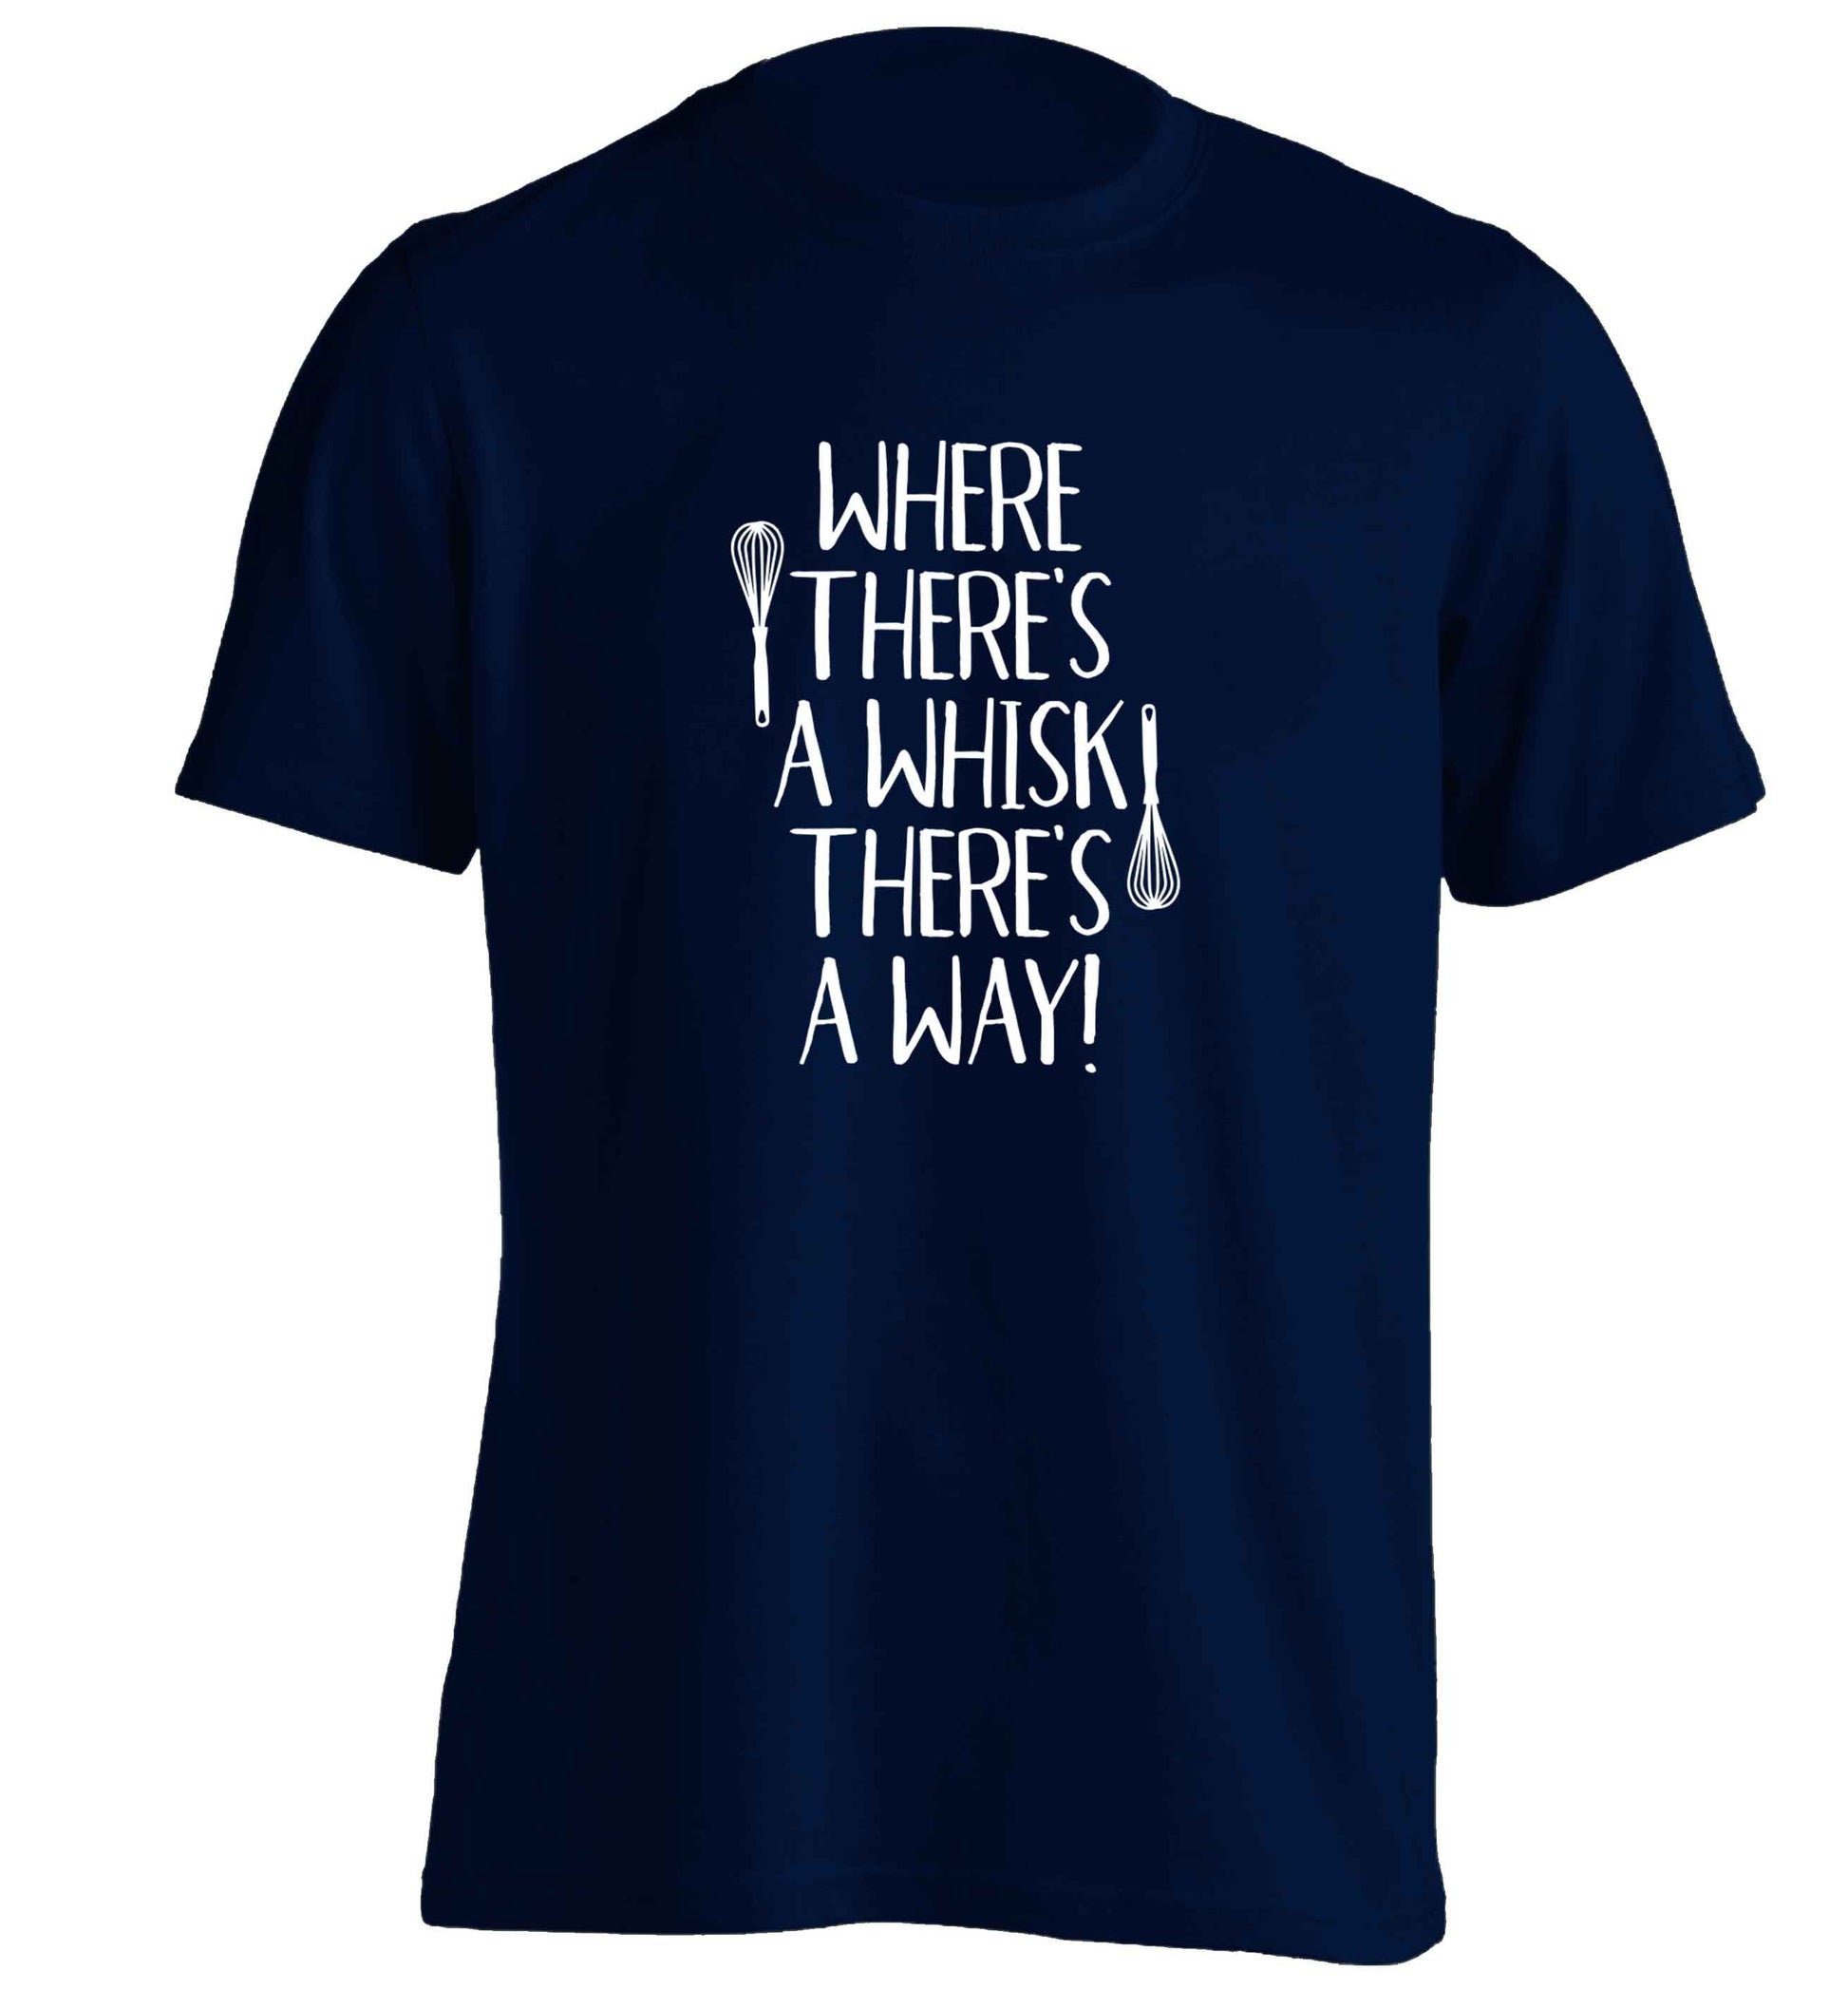 Where there's a whisk there's a way adults unisex navy Tshirt 2XL